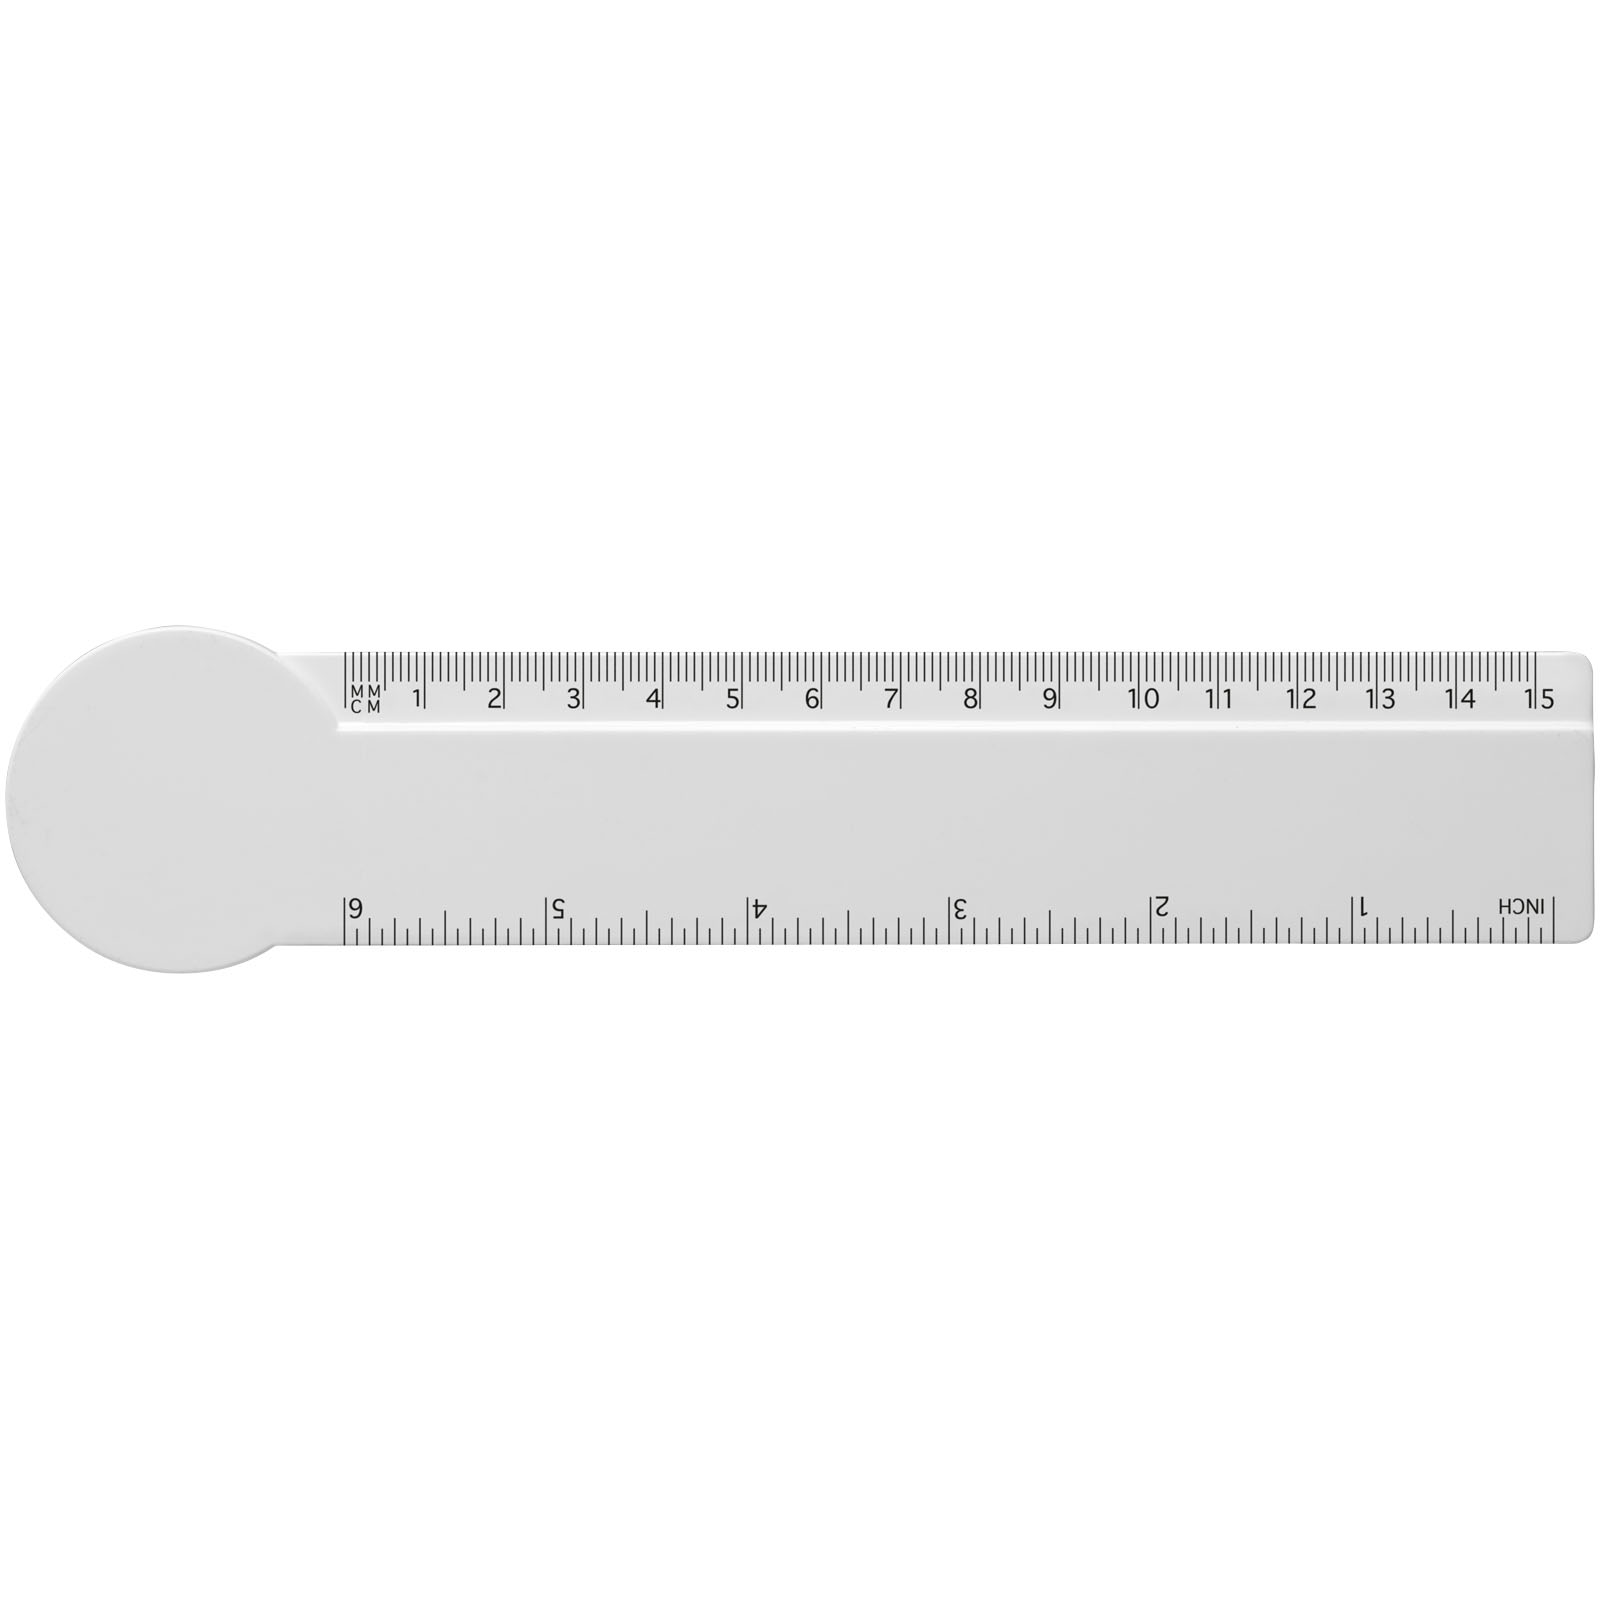 Advertising Desk Accessories - Tait 15 cm circle-shaped recycled plastic ruler  - 1